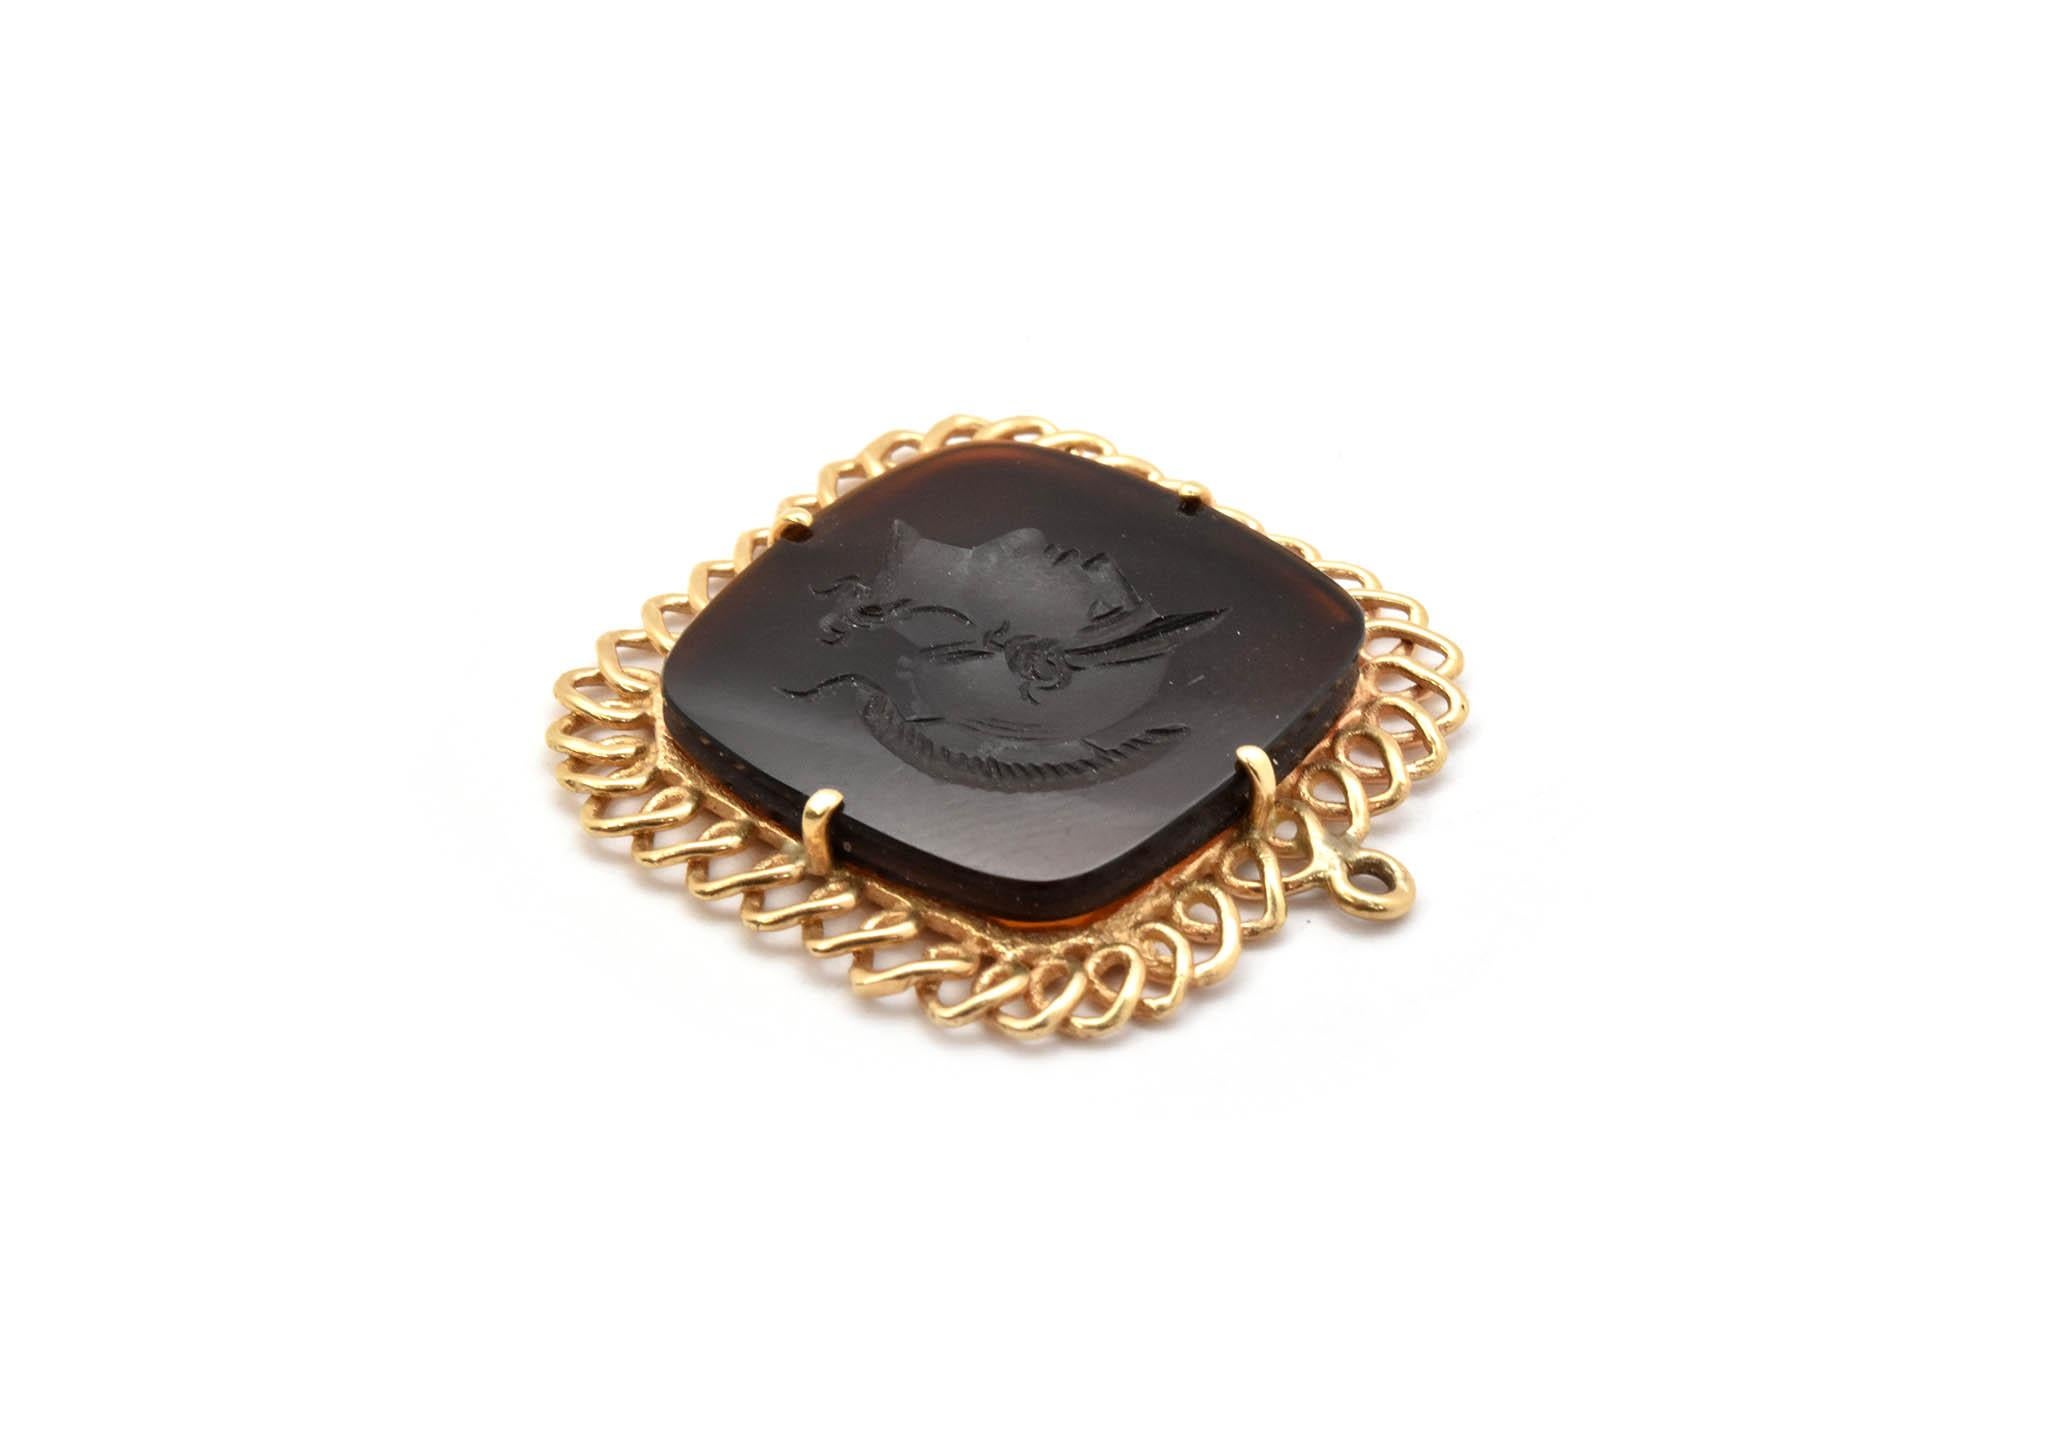 14 Karat Yellow Gold Carved Intaglio Pendant Charm 5.0 Grams In Excellent Condition For Sale In Scottsdale, AZ